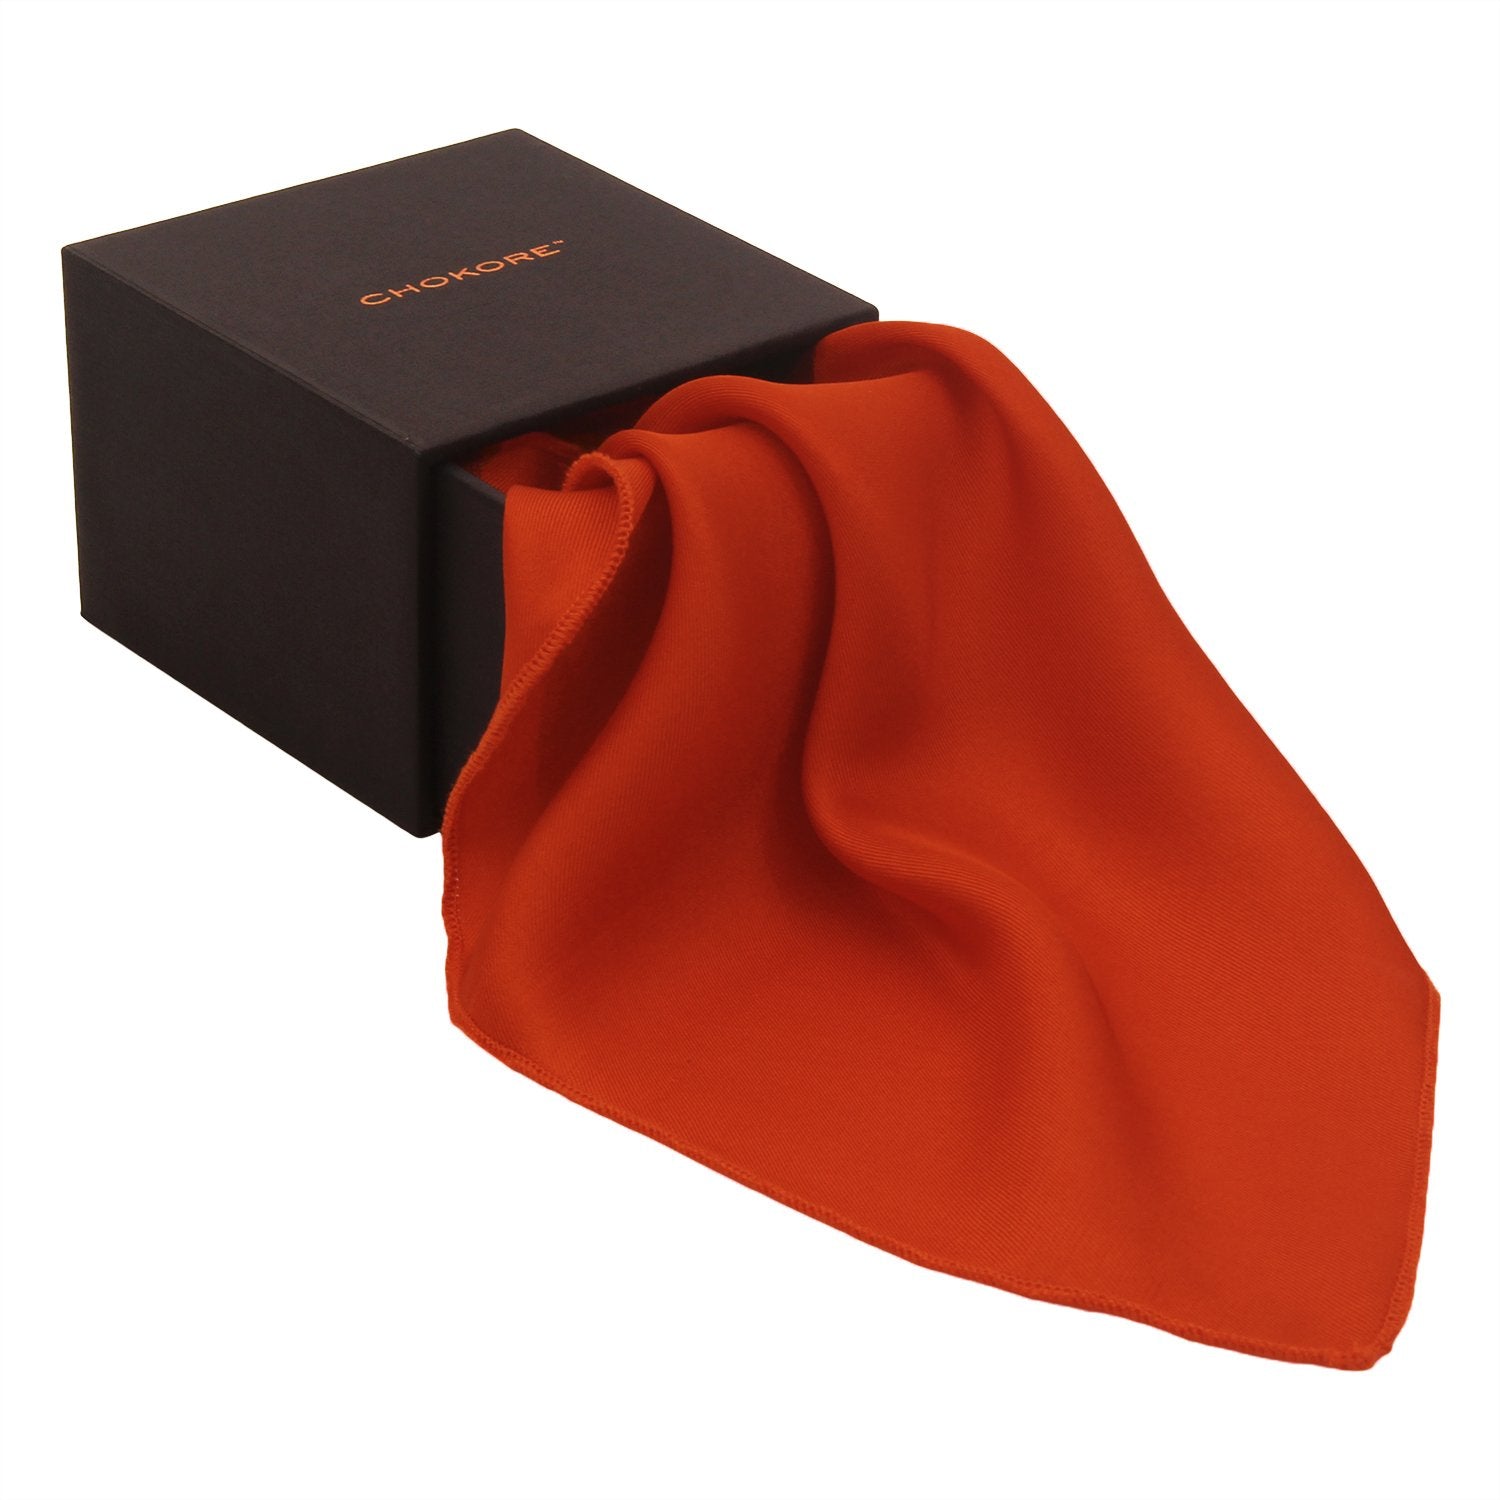 Chokore Mandarin Red Pure Silk Pocket Square, from the Solids Line